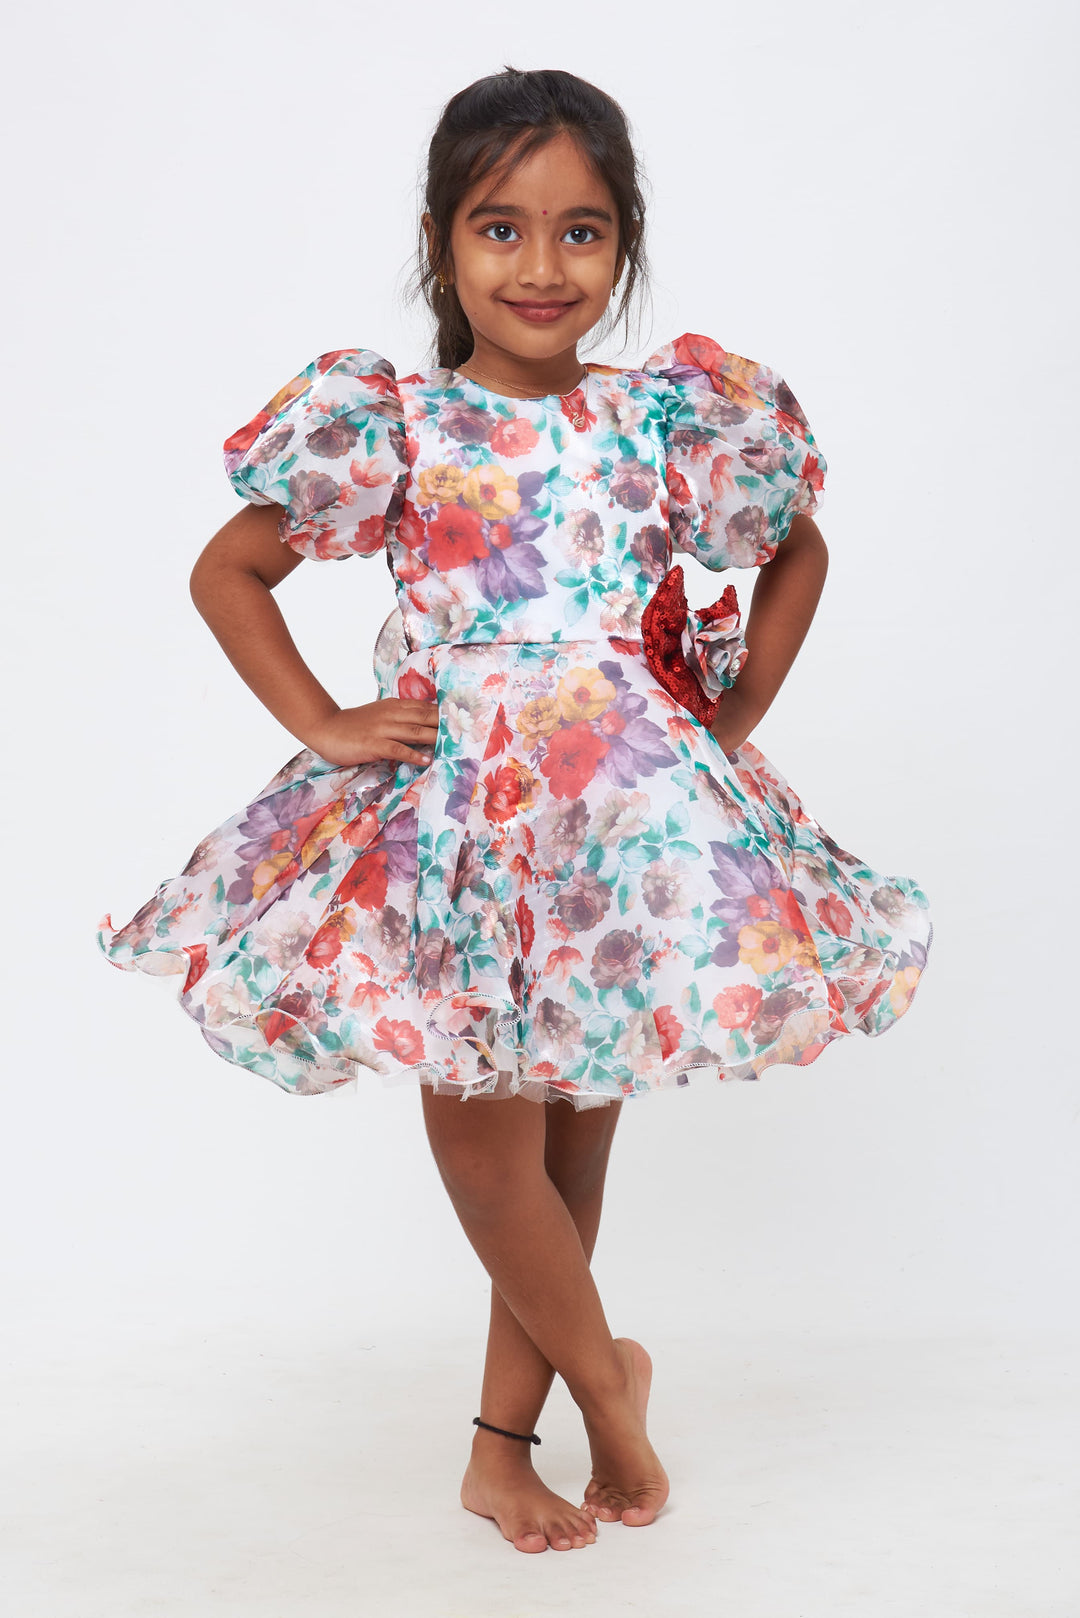 The Nesavu Girls Fancy Party Frock Blooming Beauty: Girls Floral Dress with Sparkling Red Bow Accent Nesavu 16 (1Y) / multicolor / Organza Printed PF156A-16 Dazzling Designs for Young Fashionistas | Party Frocks Collection | The Nesavu